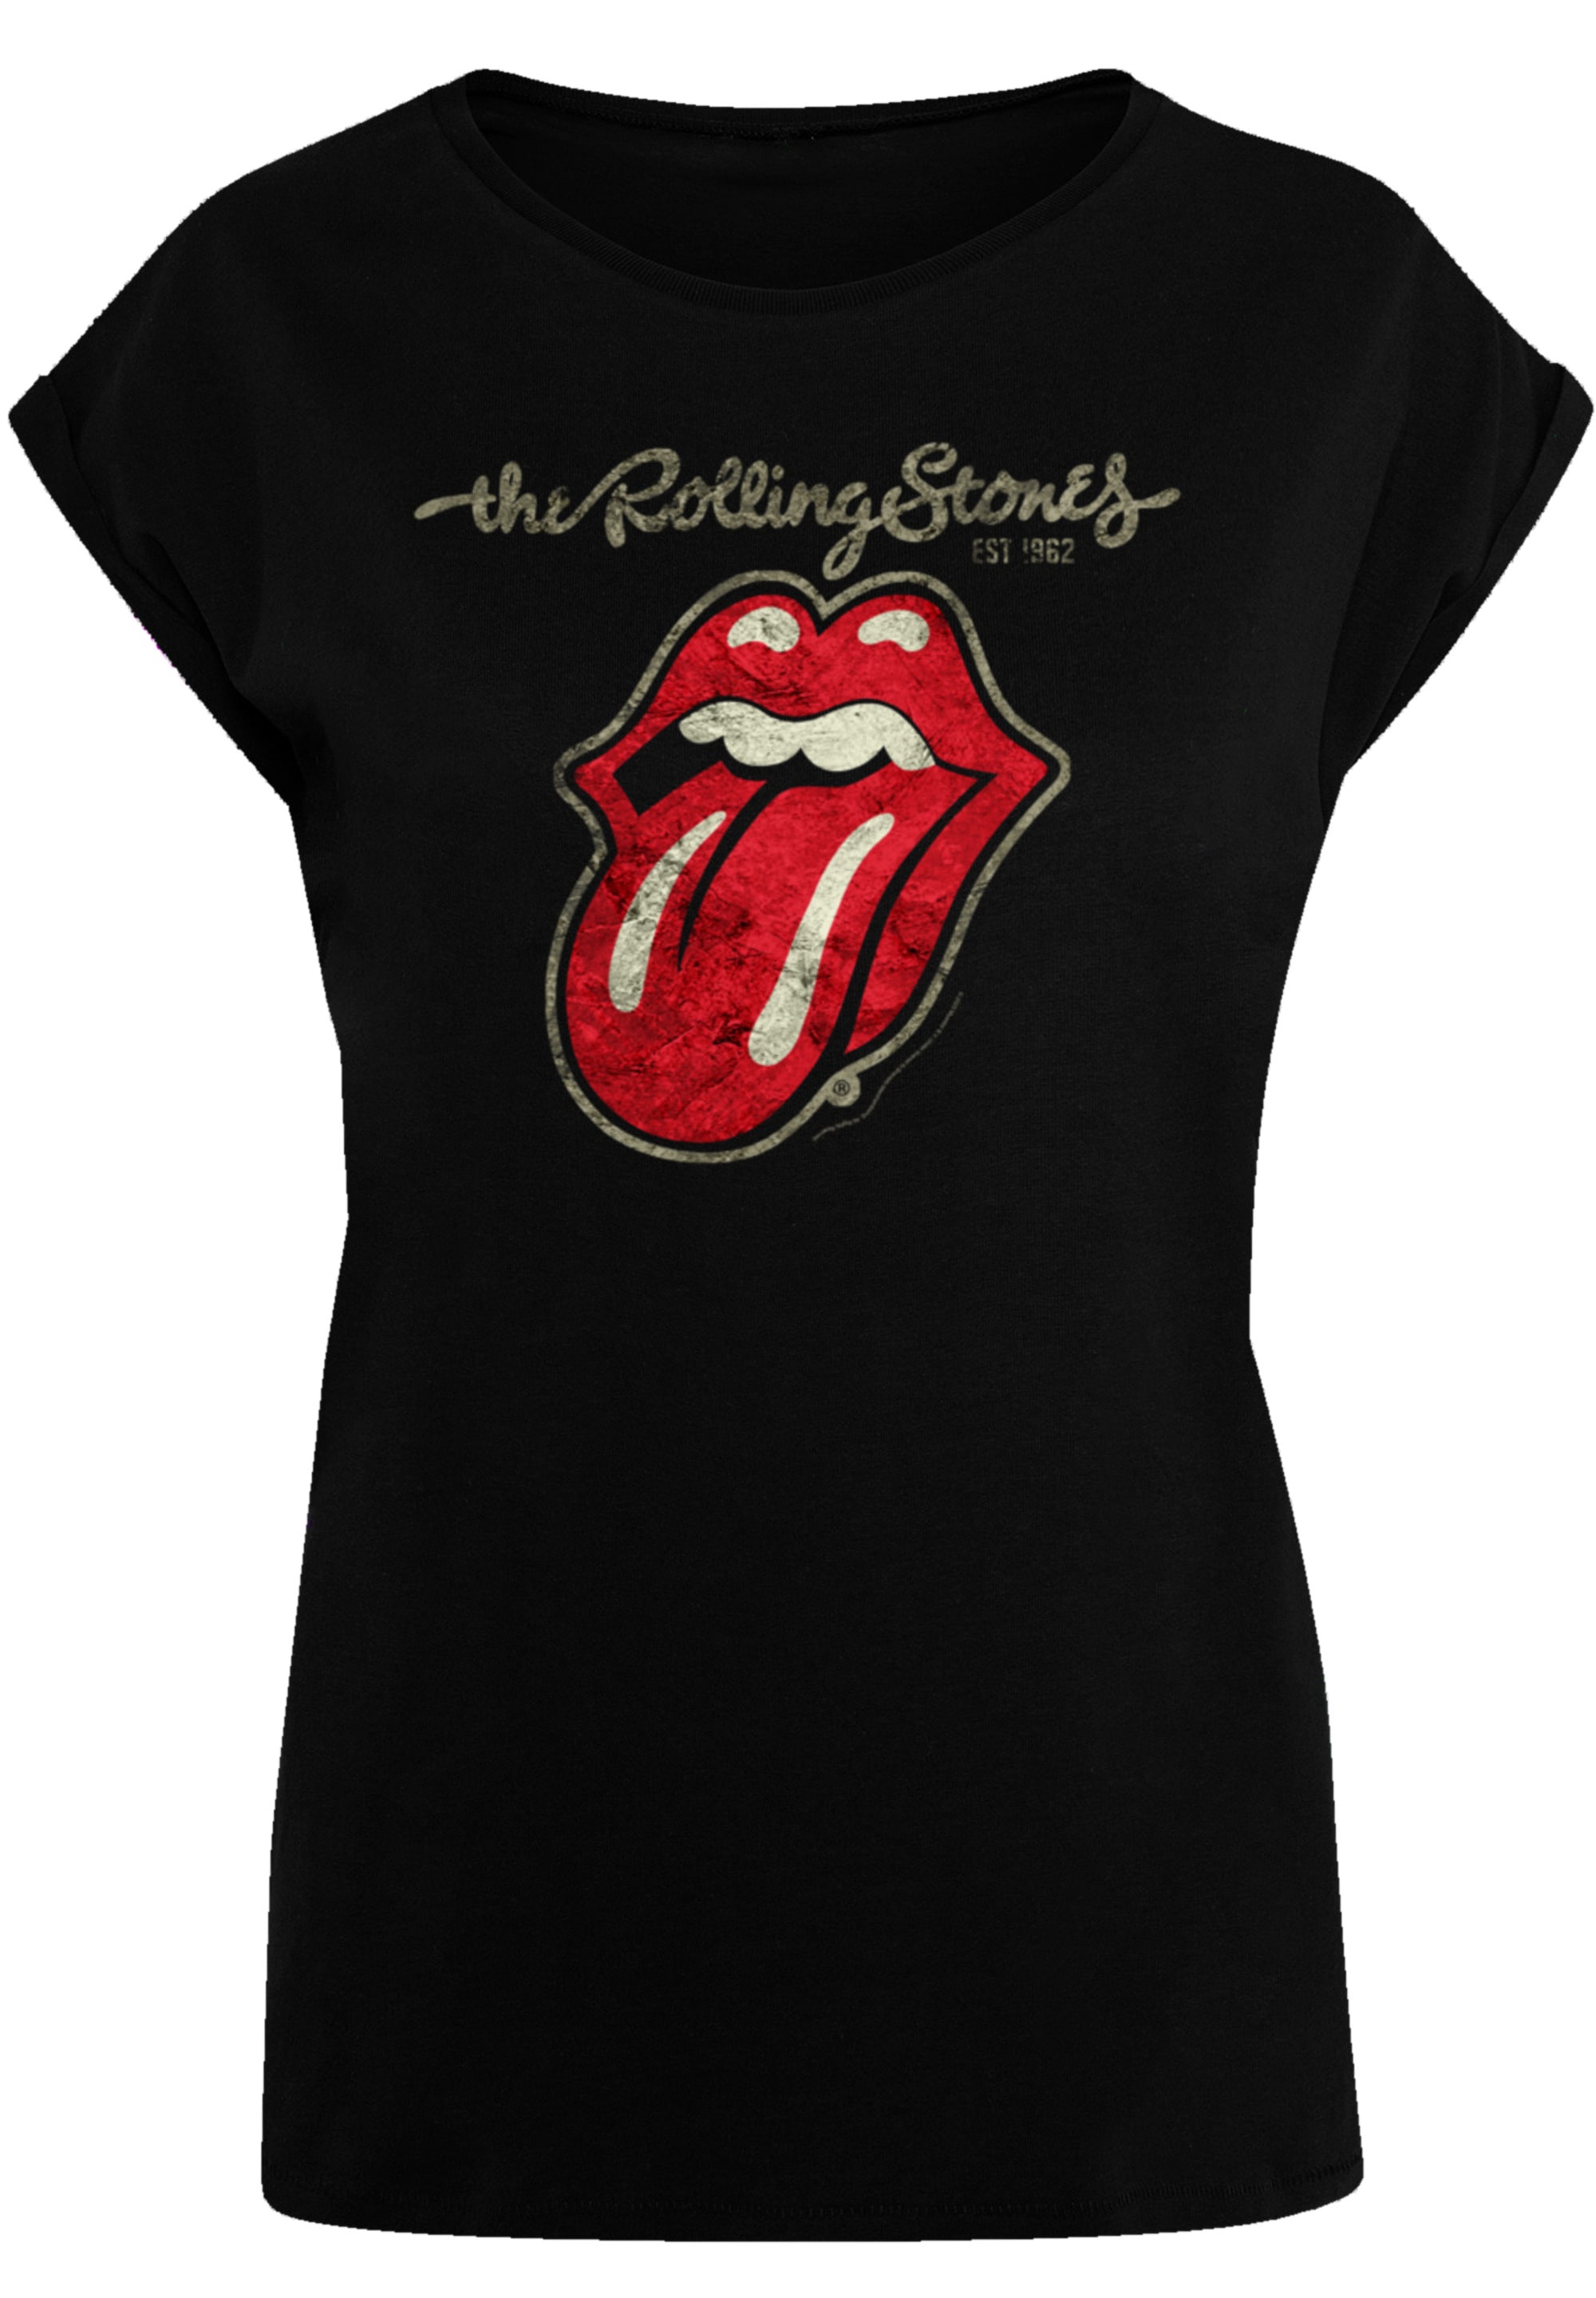 F4NT4STIC T-Shirt »The Rolling Stones walking Plastered | Premium Washed«, I\'m Qualität Tongue